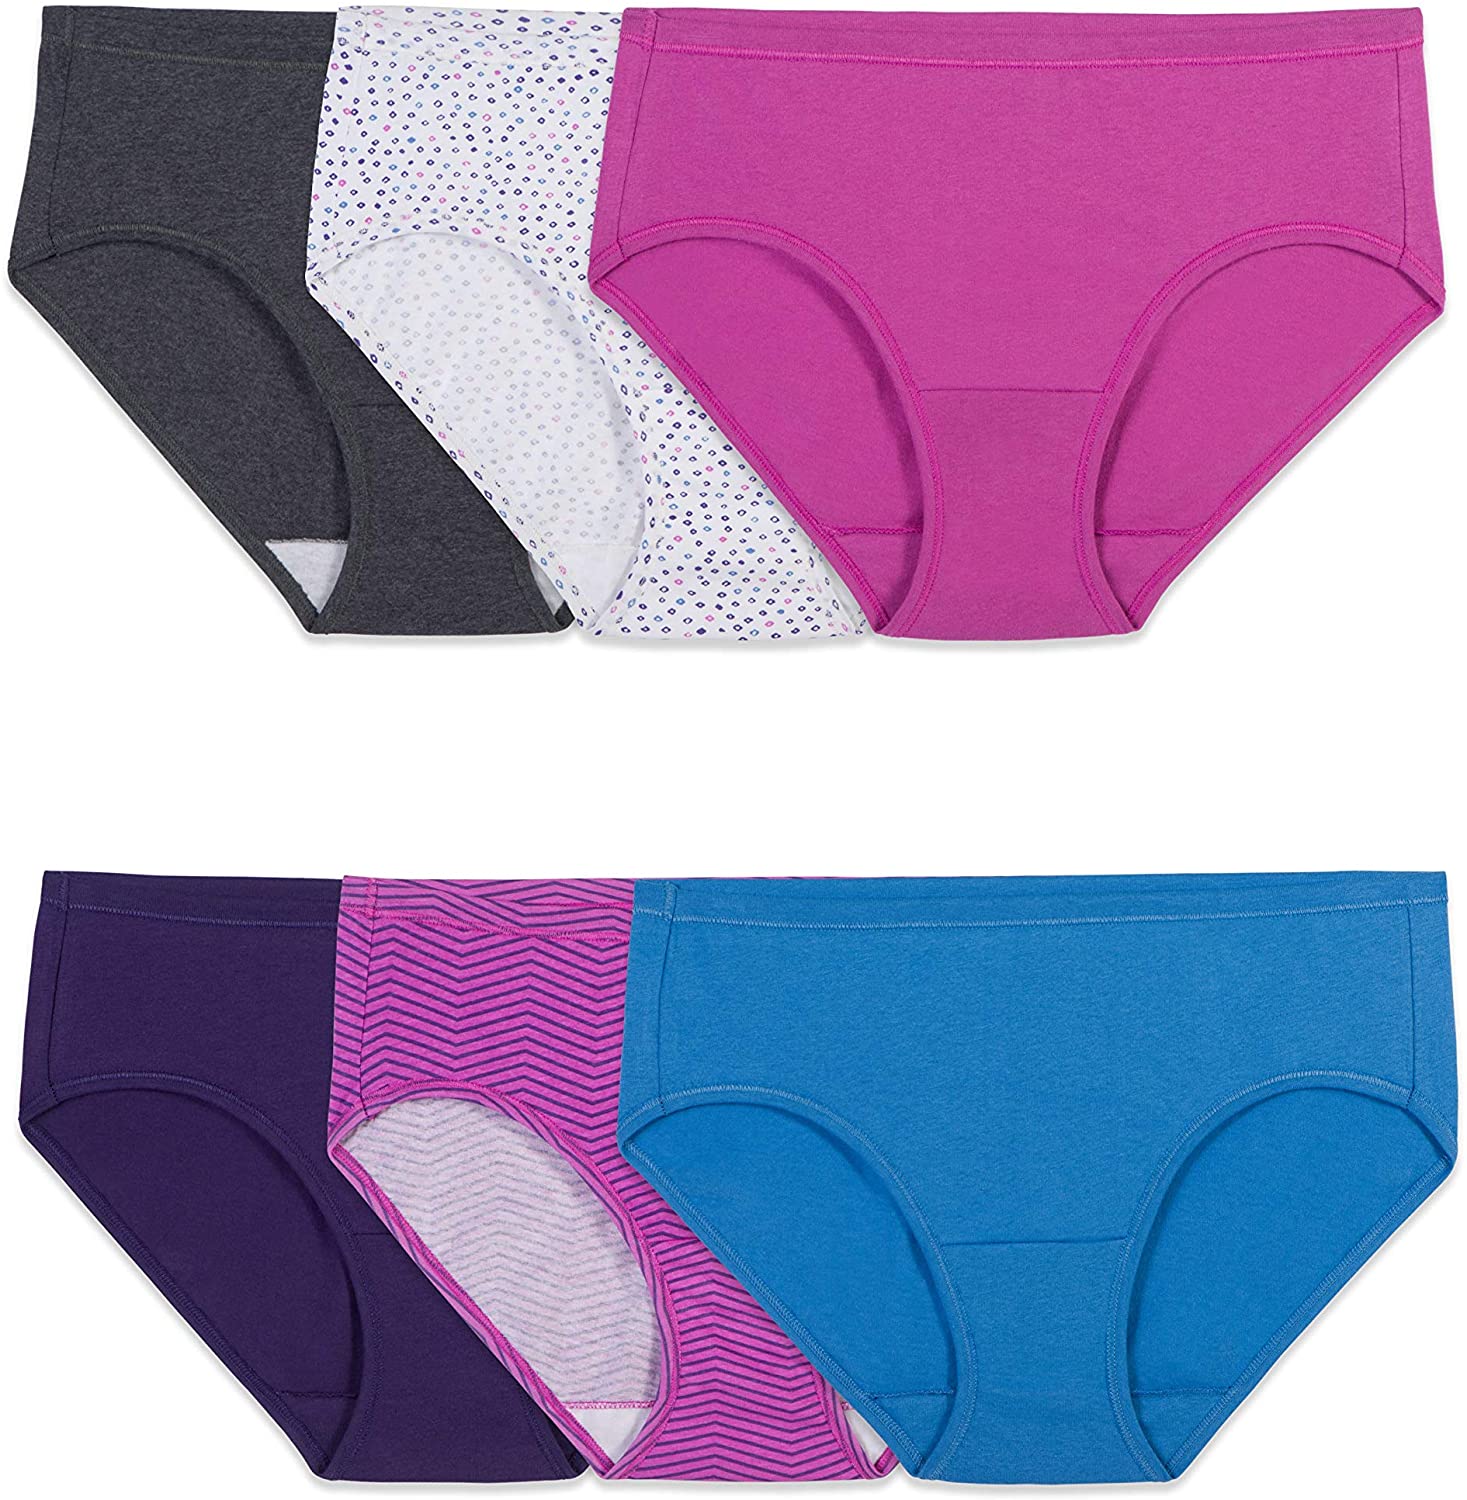 6DHICC2 - Fruit Of The Loom Womens Cotton Hipster Panties 6-Pack